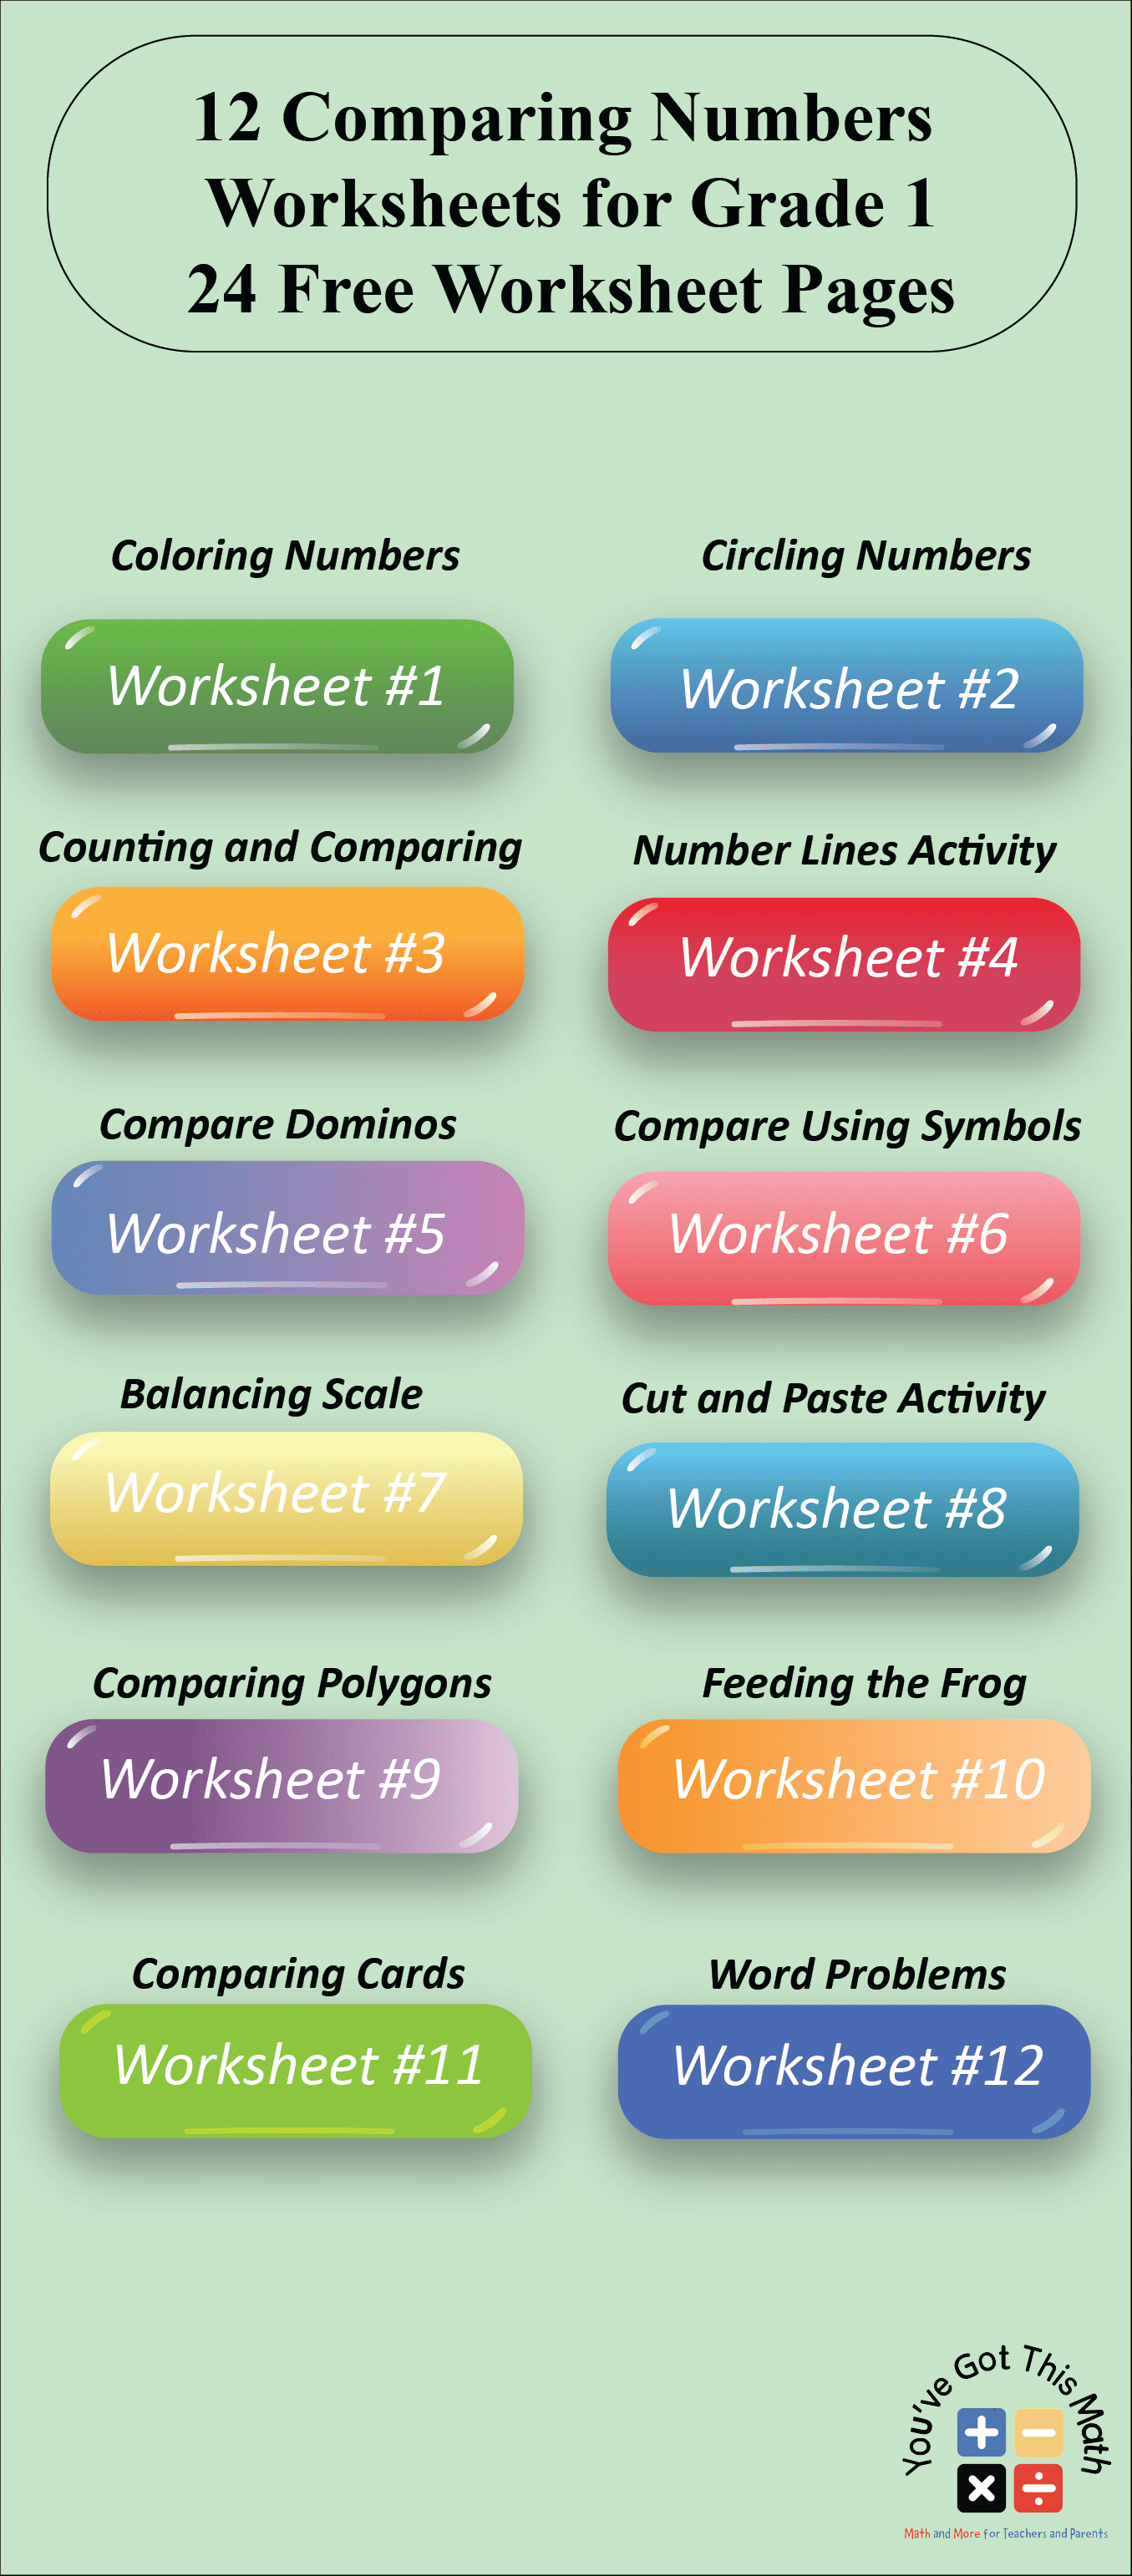 12 Free Comparing Numbers Worksheets for Grade 1-01